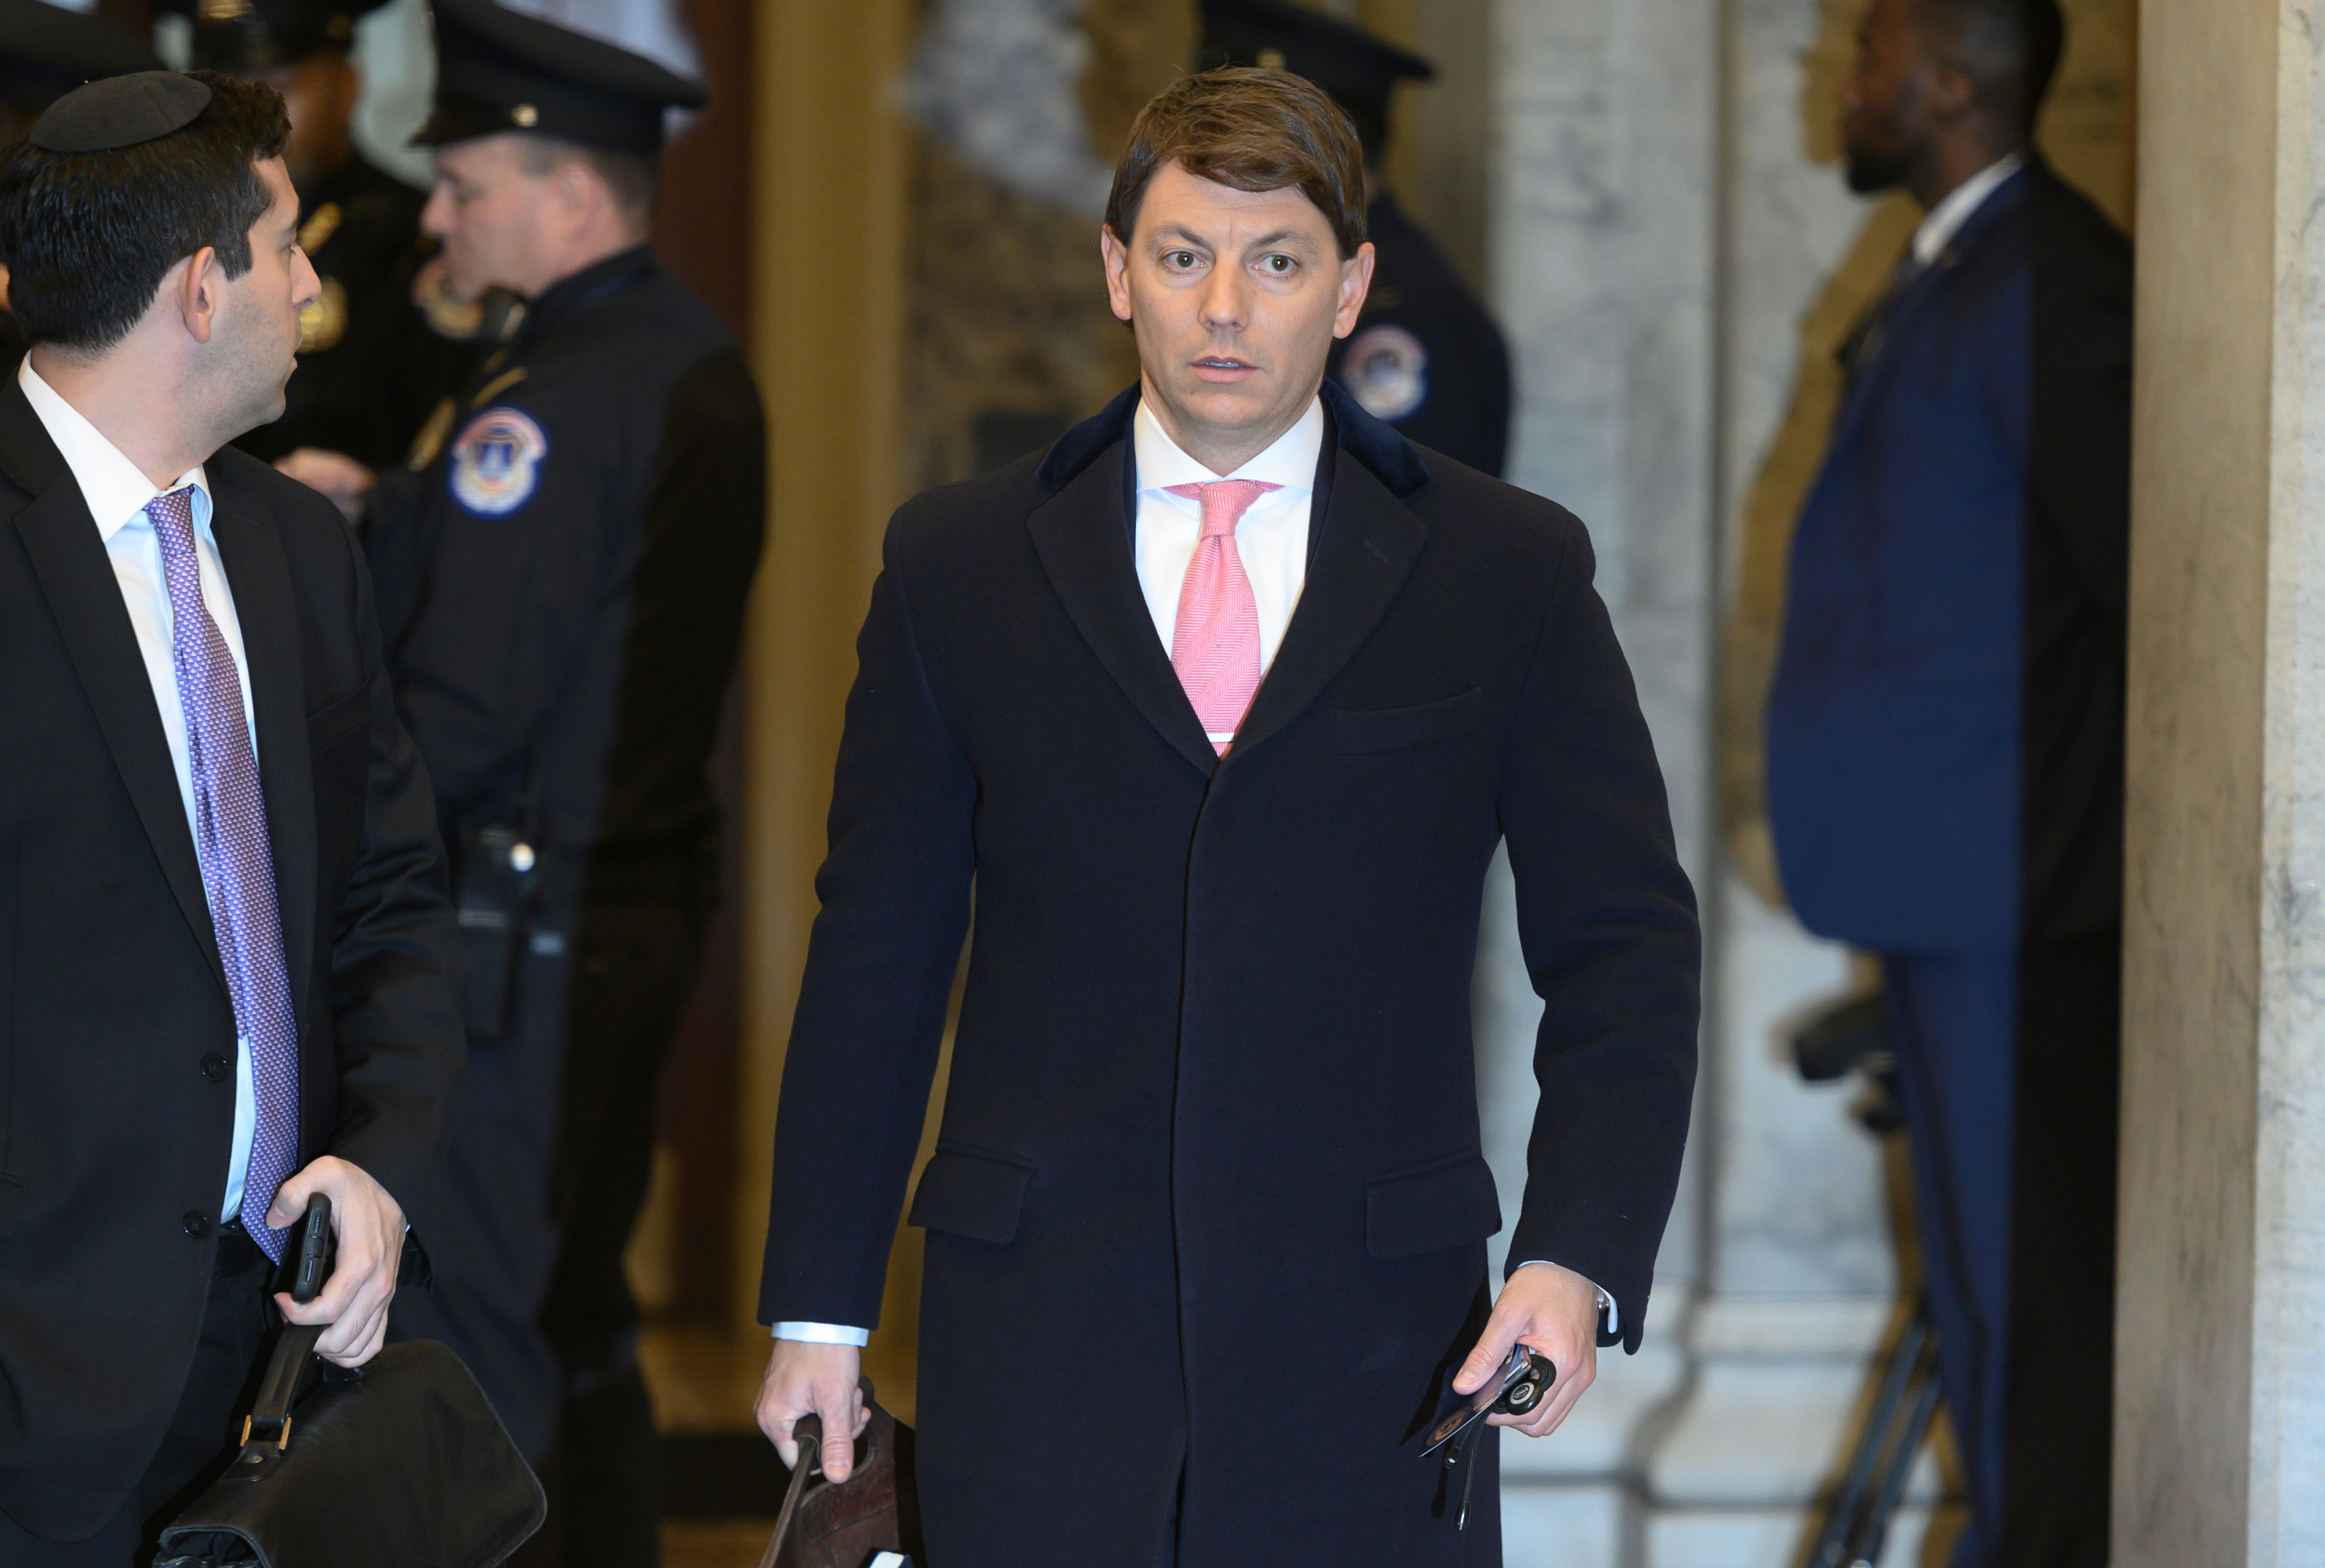 Hogan Gidley, the White House Principal Deputy Press Secretary, arrives for the Senate impeachment trial of Trump at the US Capitol in Washington, DC, January 23, 2020. - Democrats accused US President Donald Trump at his historic Senate impeachment trial of seeking to cheat to ensure re-election in November, and called for "courage" by the president's fellow Republicans while considering the case against him. (Photo by ANDREW CABALLERO-REYNOLDS/AFP via Getty Images)